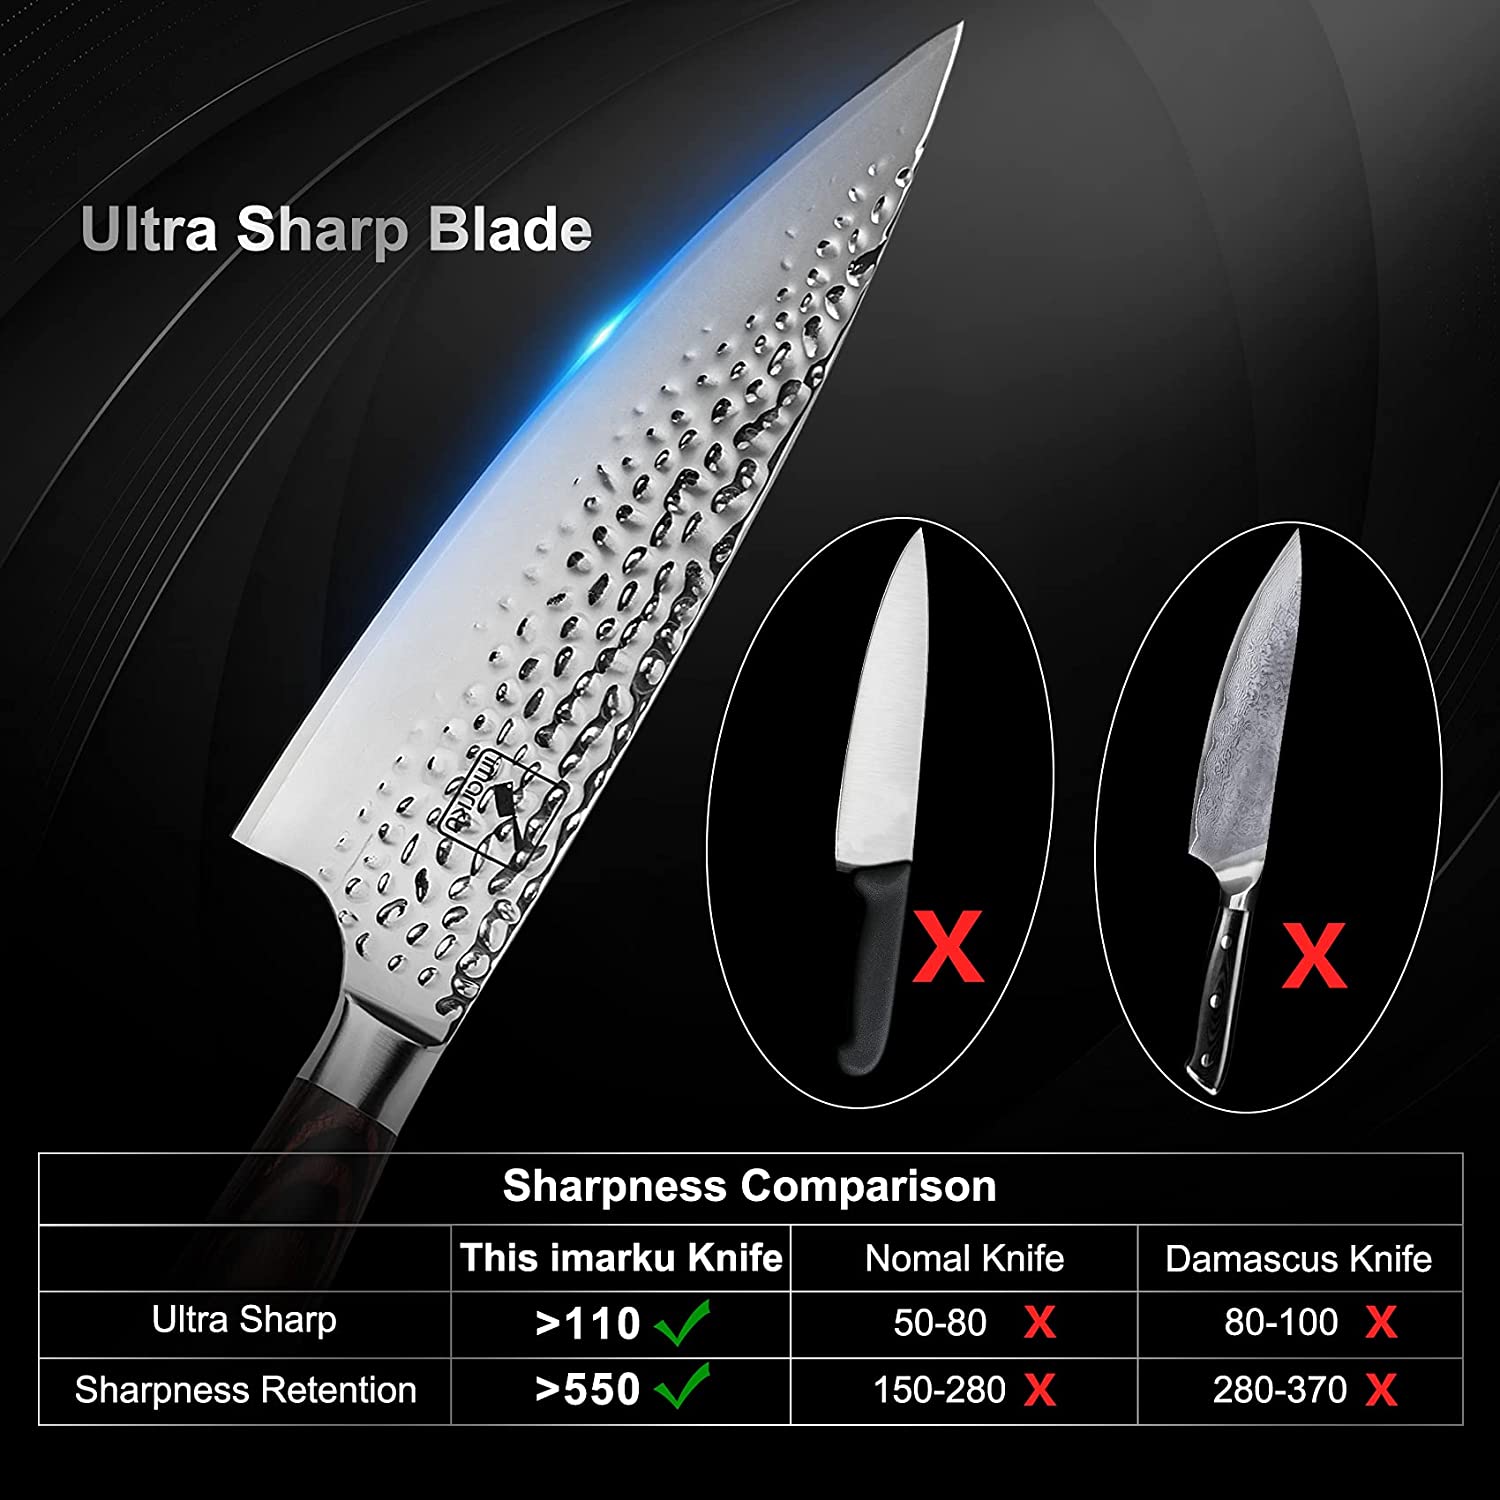 The ultimate kitchen knife guide, Features